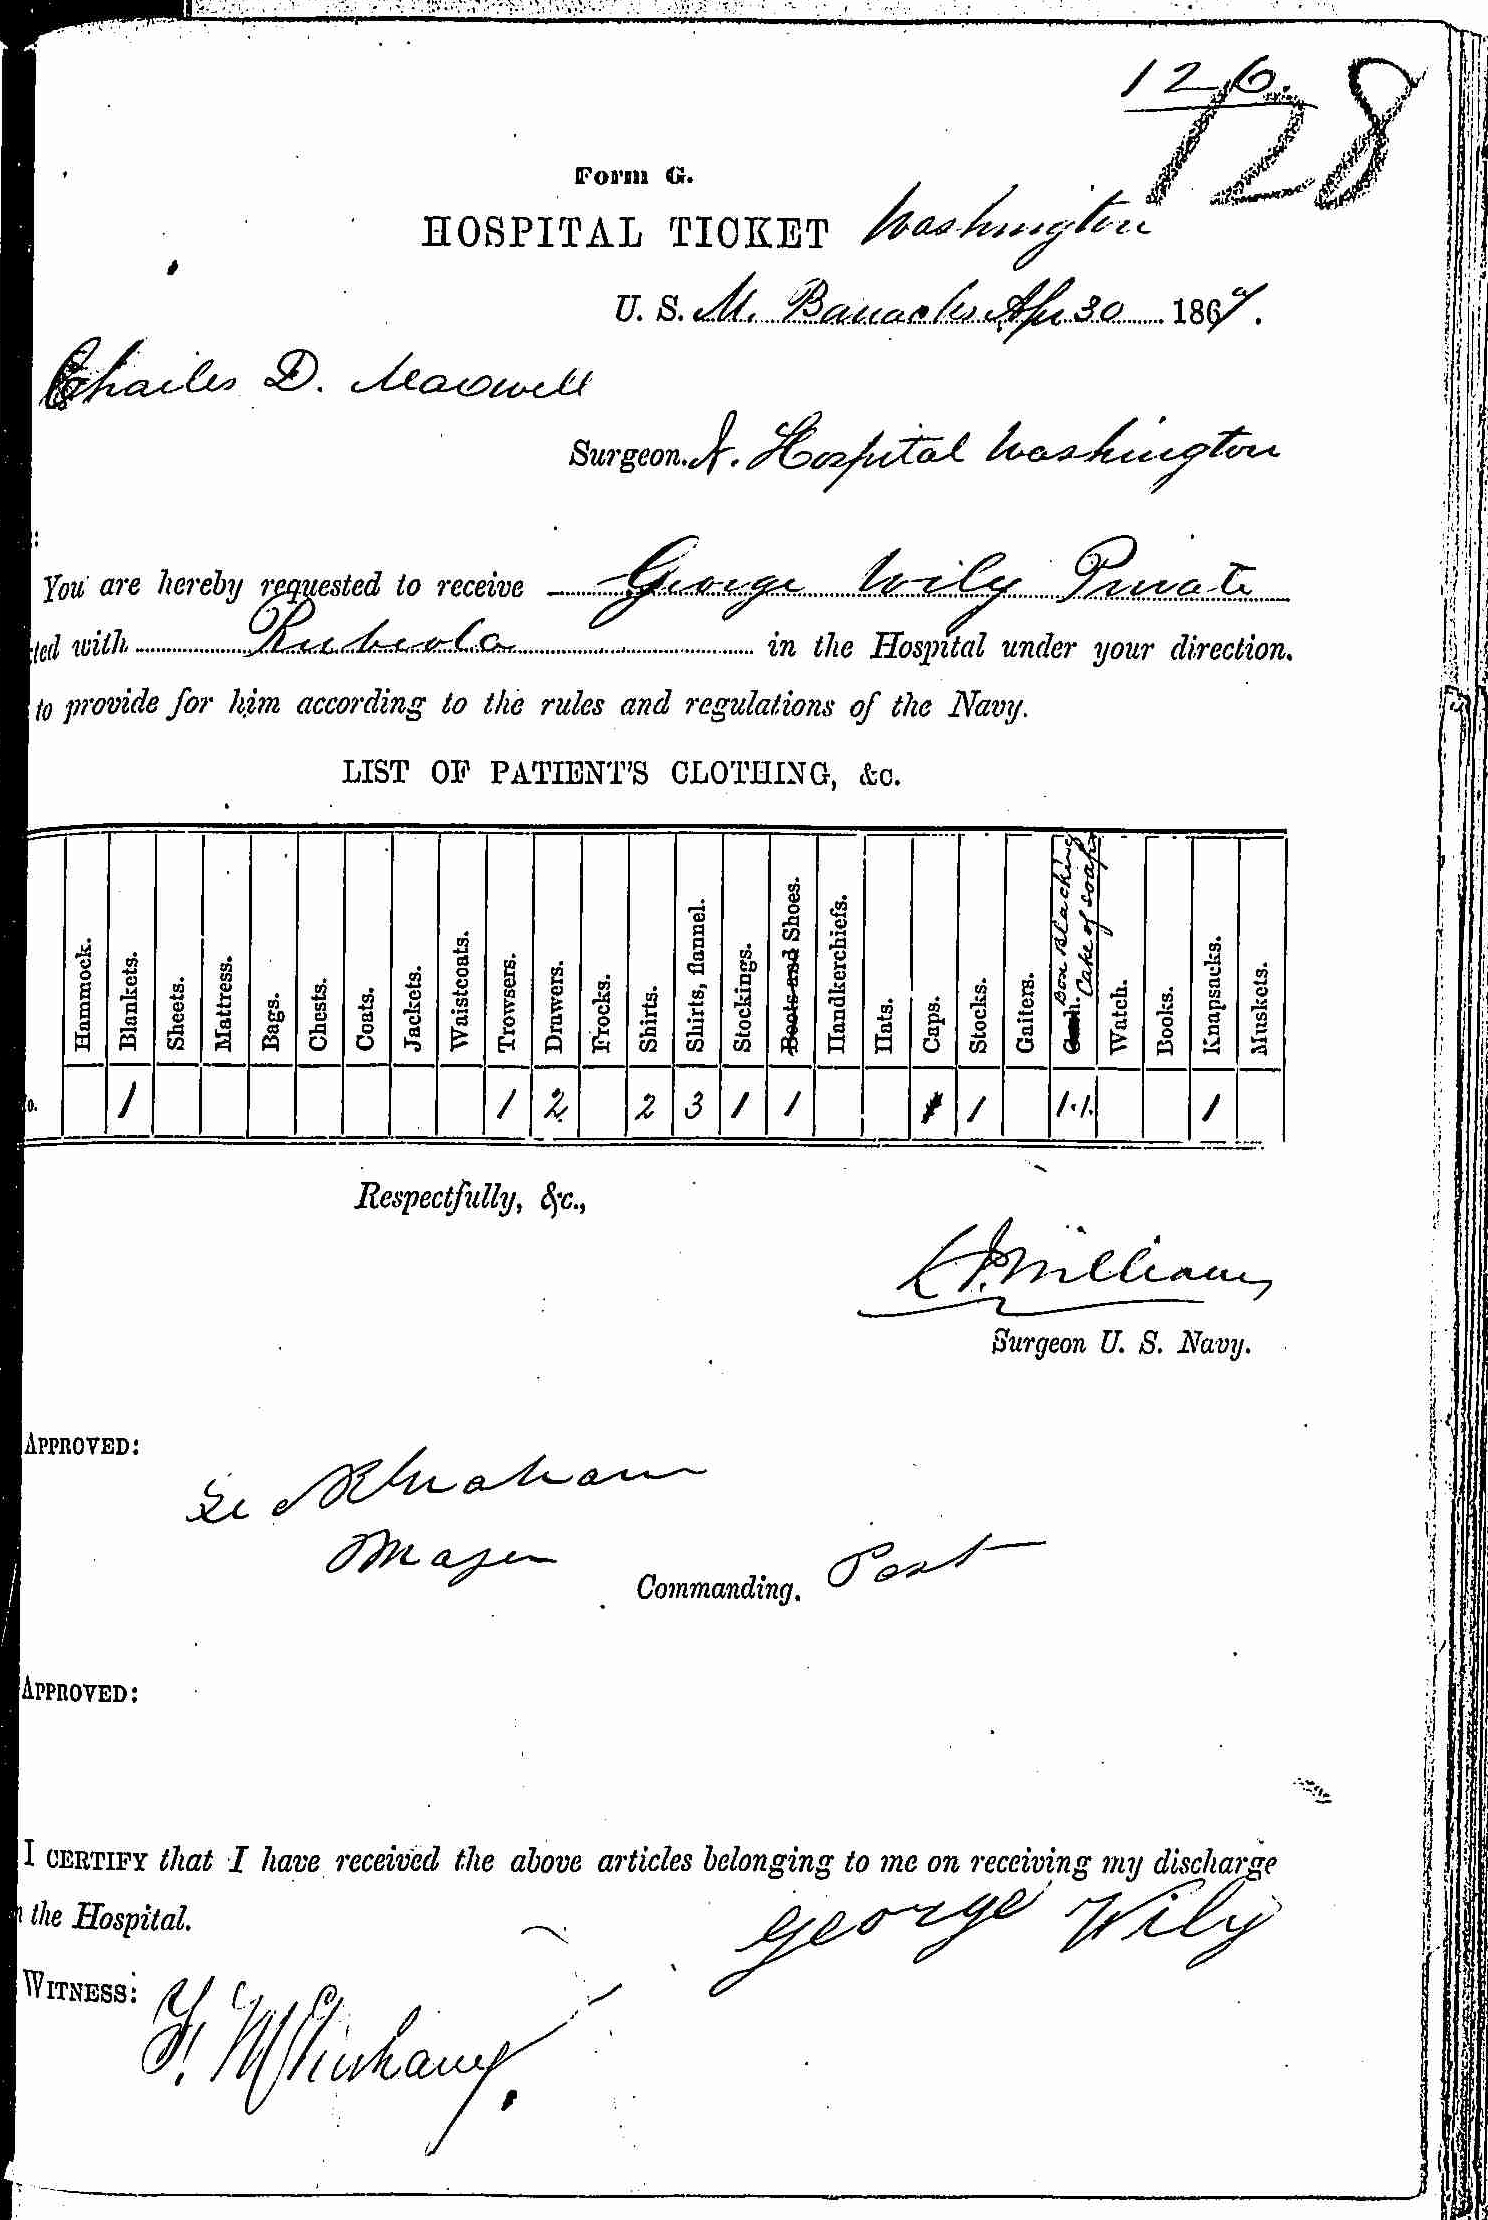 Entry for George Horton (page 1 of 2) in the log Hospital Tickets and Case Papers - Naval Hospital - Washington, D.C. - 1866-68